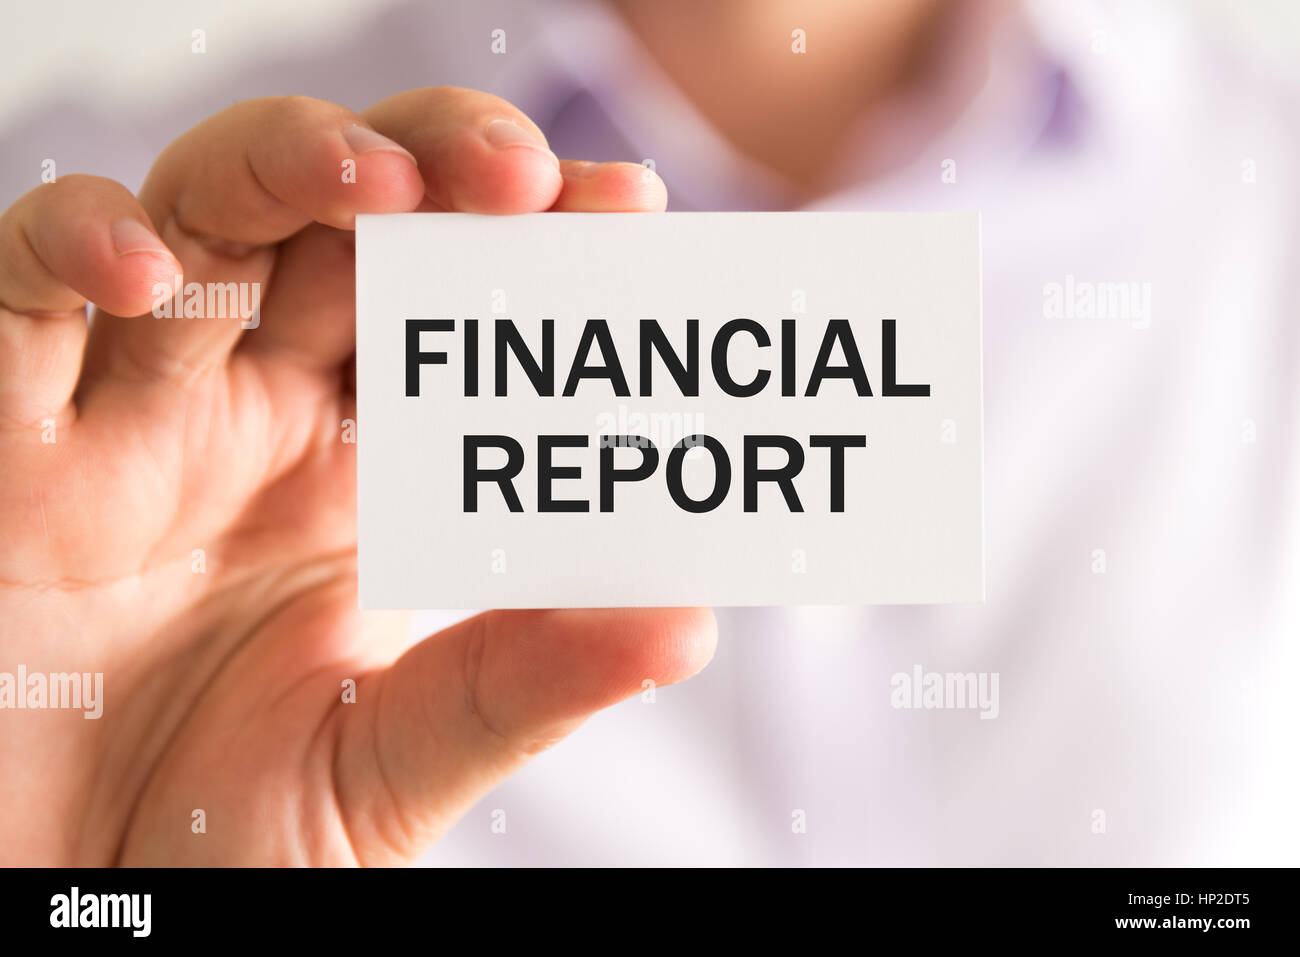 Closeup on businessman holding a card with text FINANCIAL REPORT, business concept image with soft focus background Stock Photo